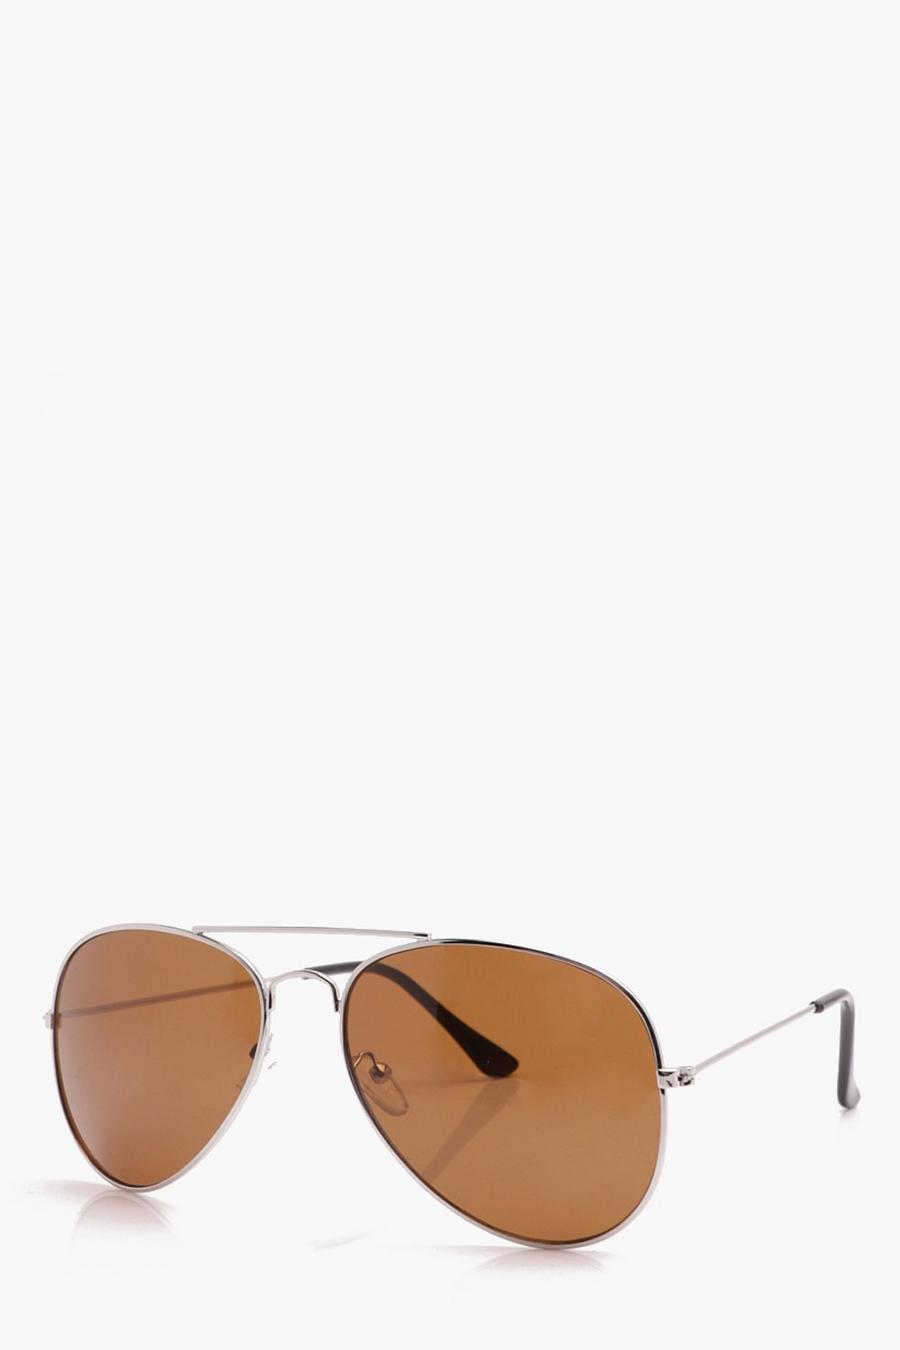 Silver Classic Aviator Sunglasses With Brown Lens image number 1